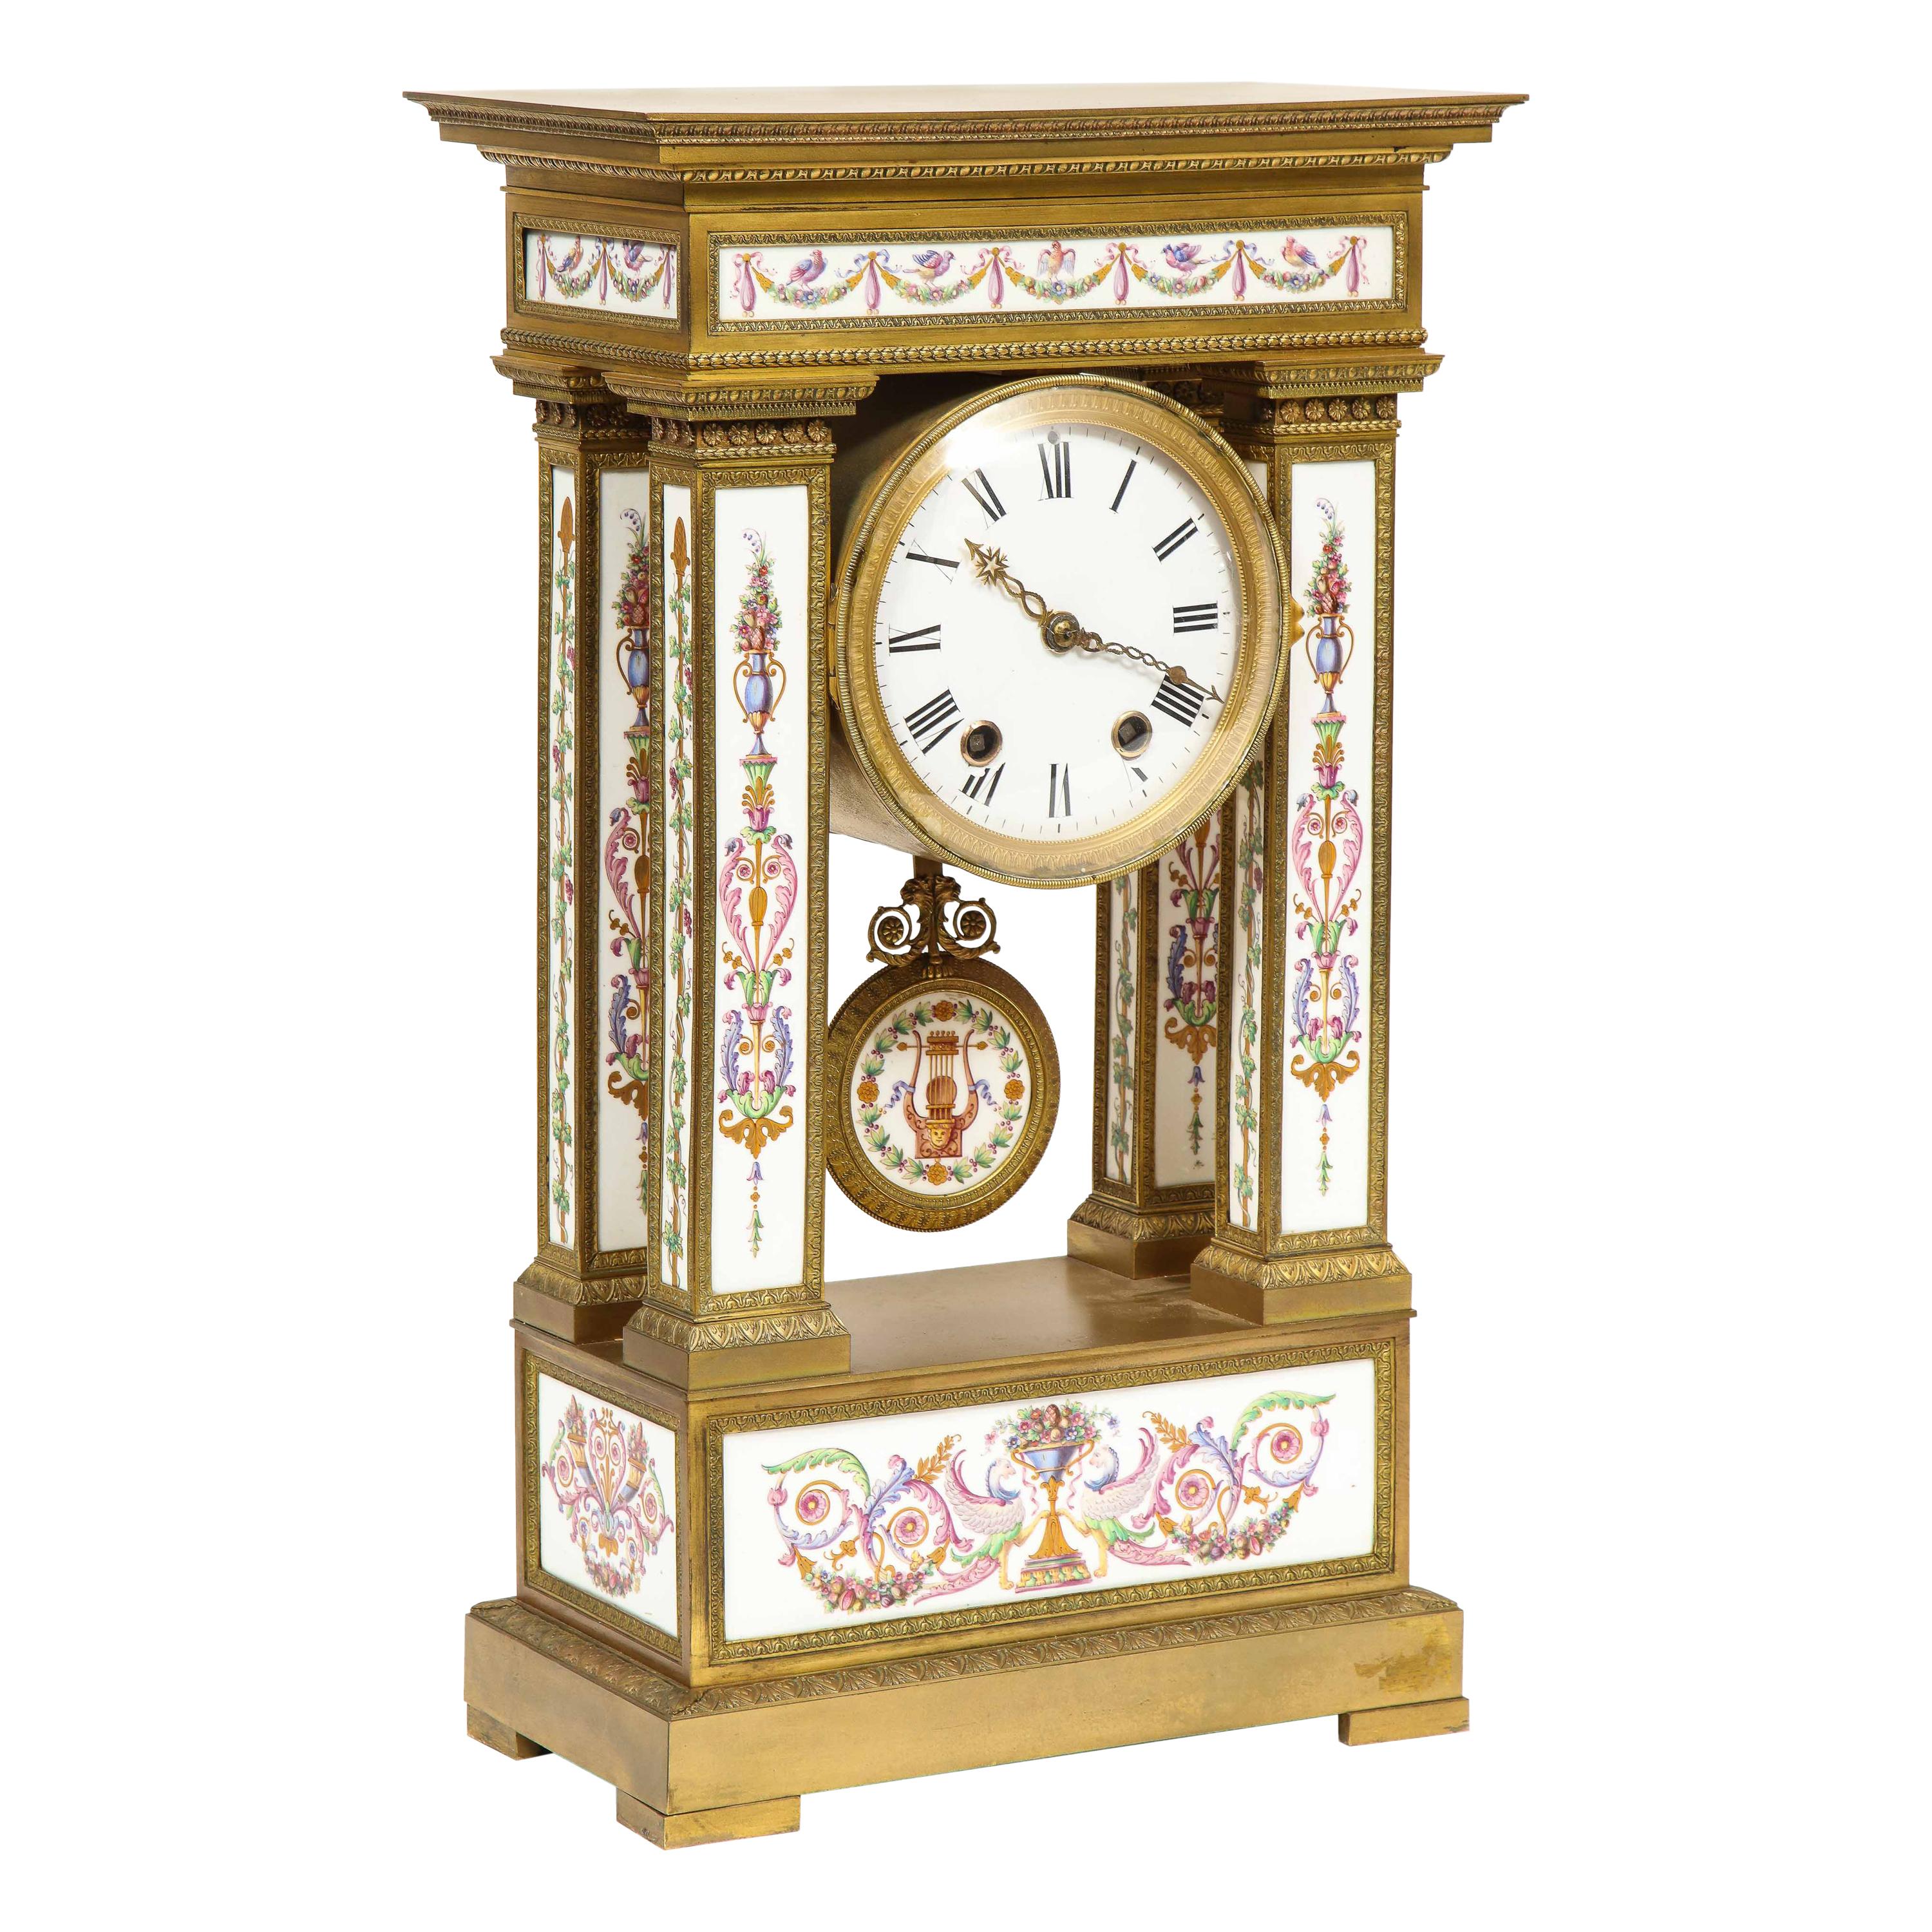 A Rare and Exquisite French Ormolu and Porcelain Clock, attributed to Deniere  For Sale